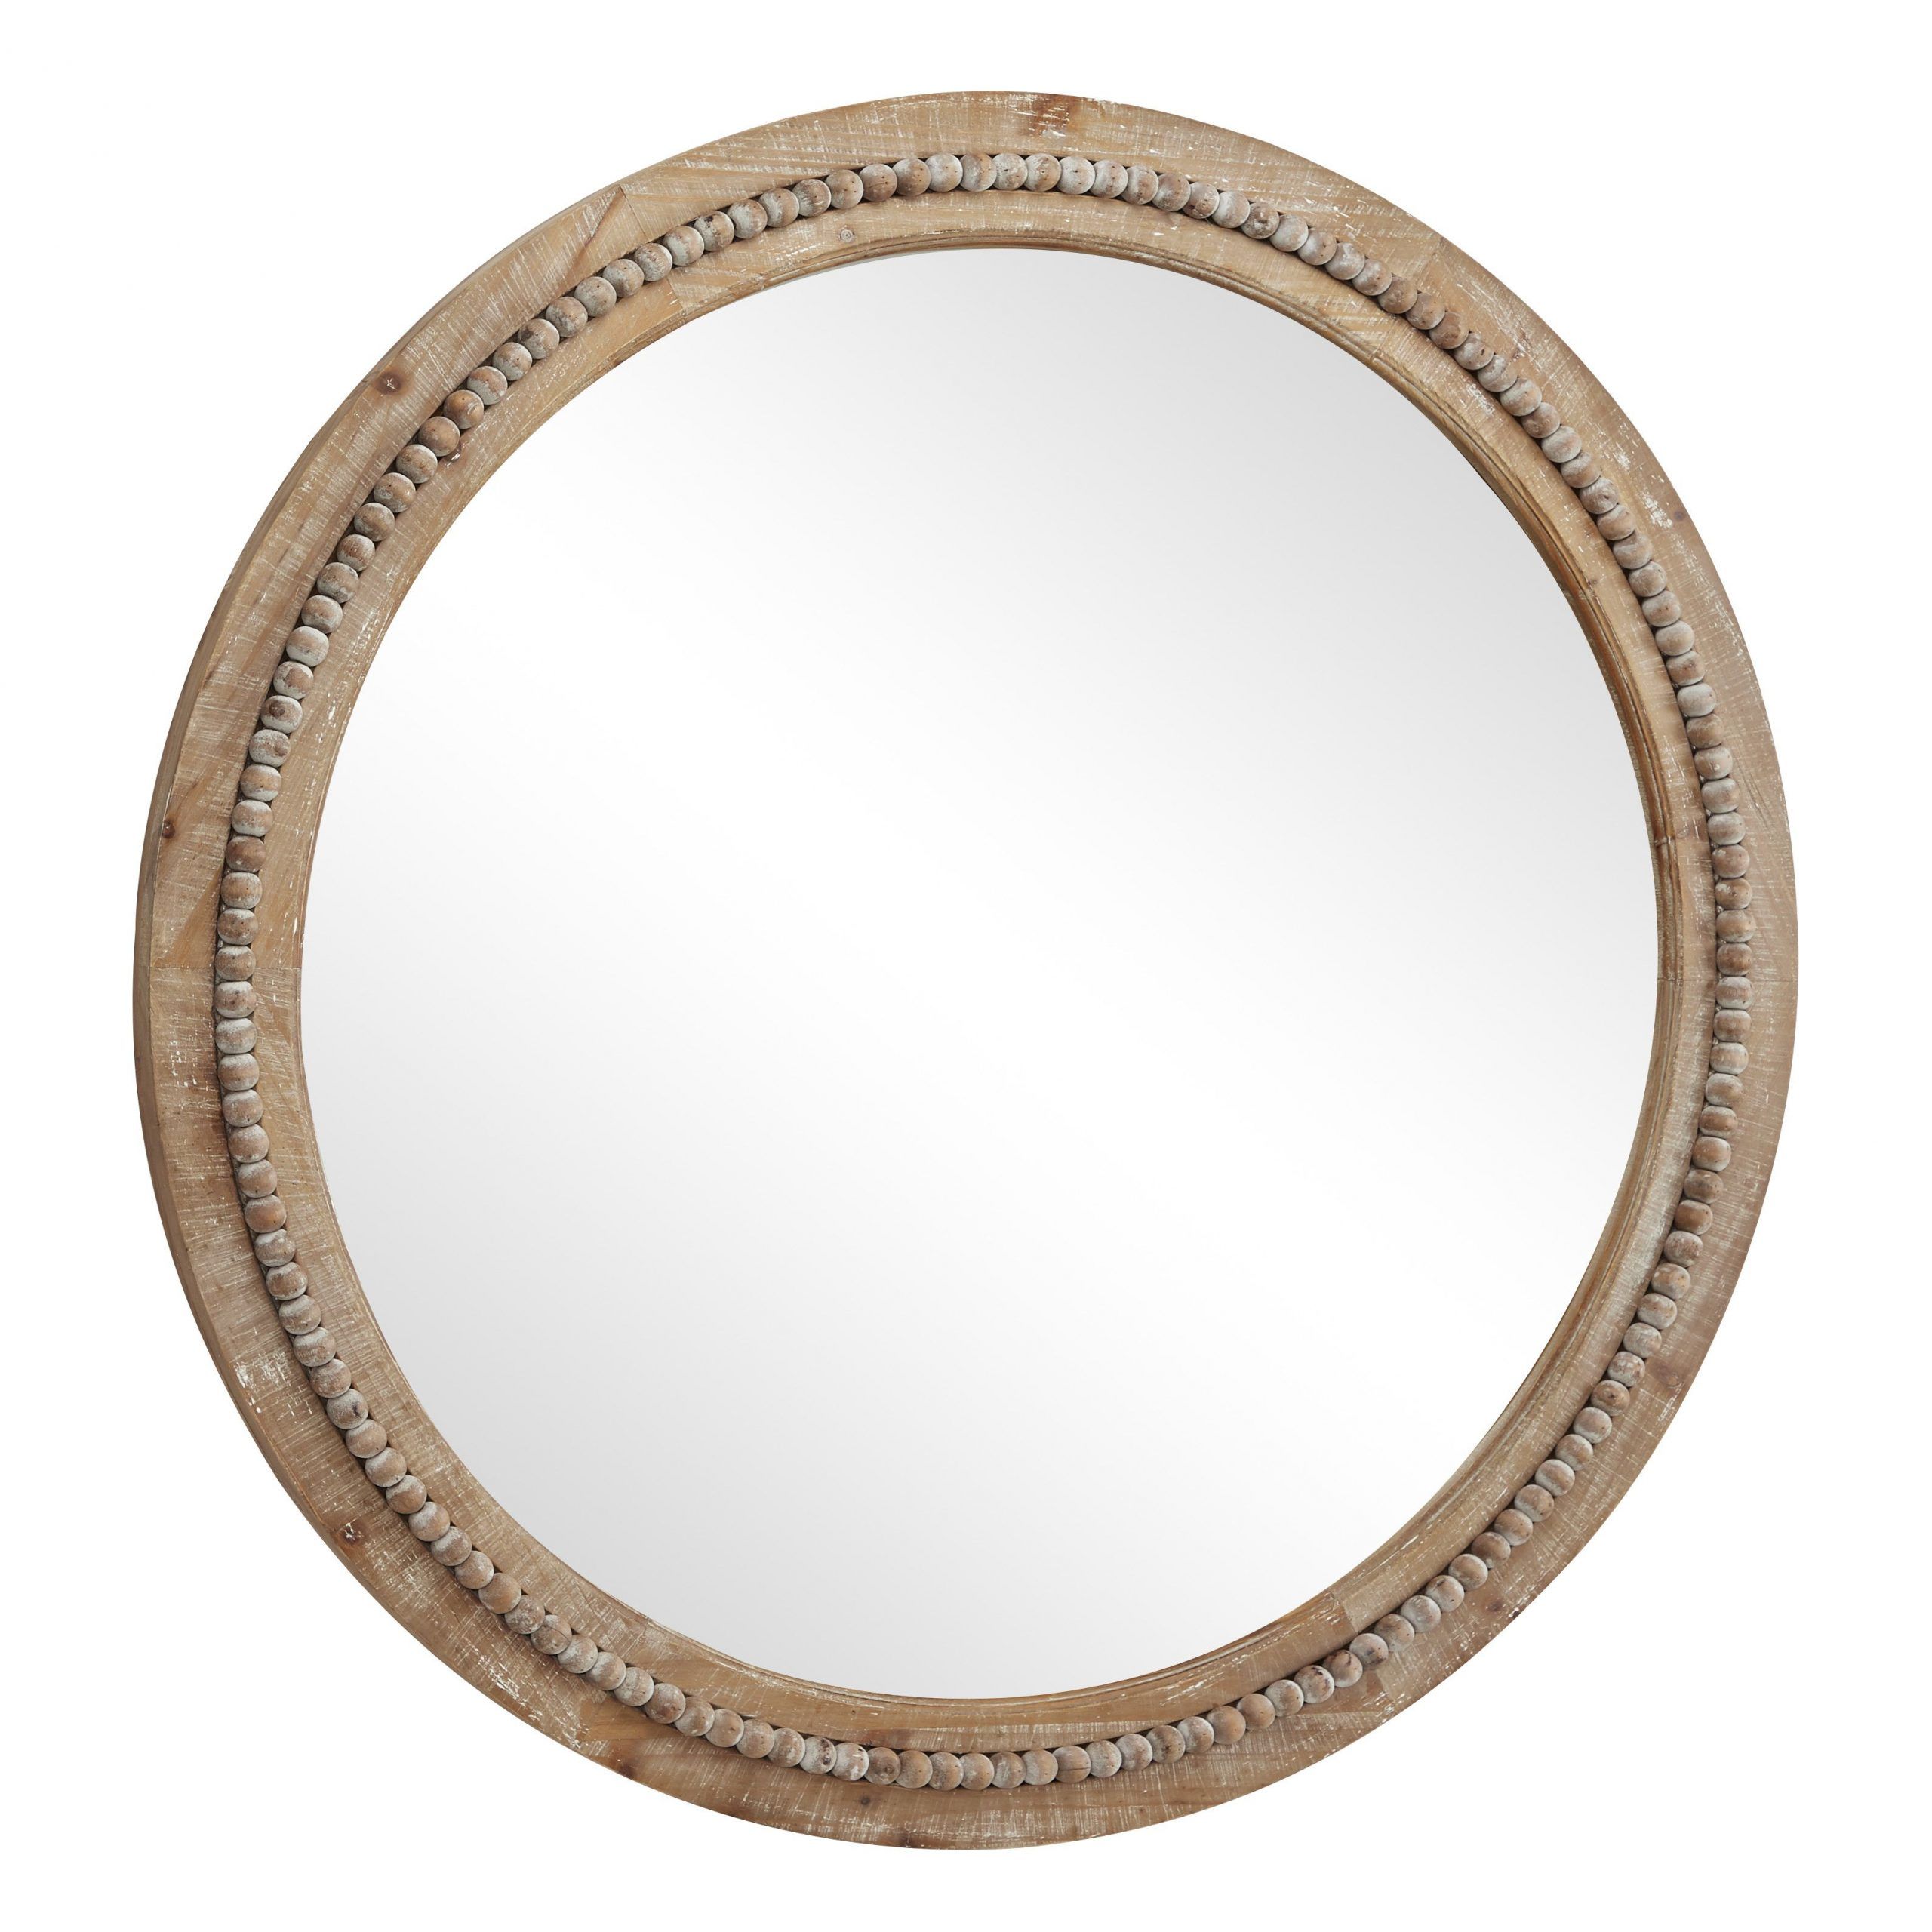 Decmode – 36" Large Round Natural Wood Wall Mirror W/ Decorative Wood With Regard To Organic Natural Wood Round Wall Mirrors (View 3 of 15)